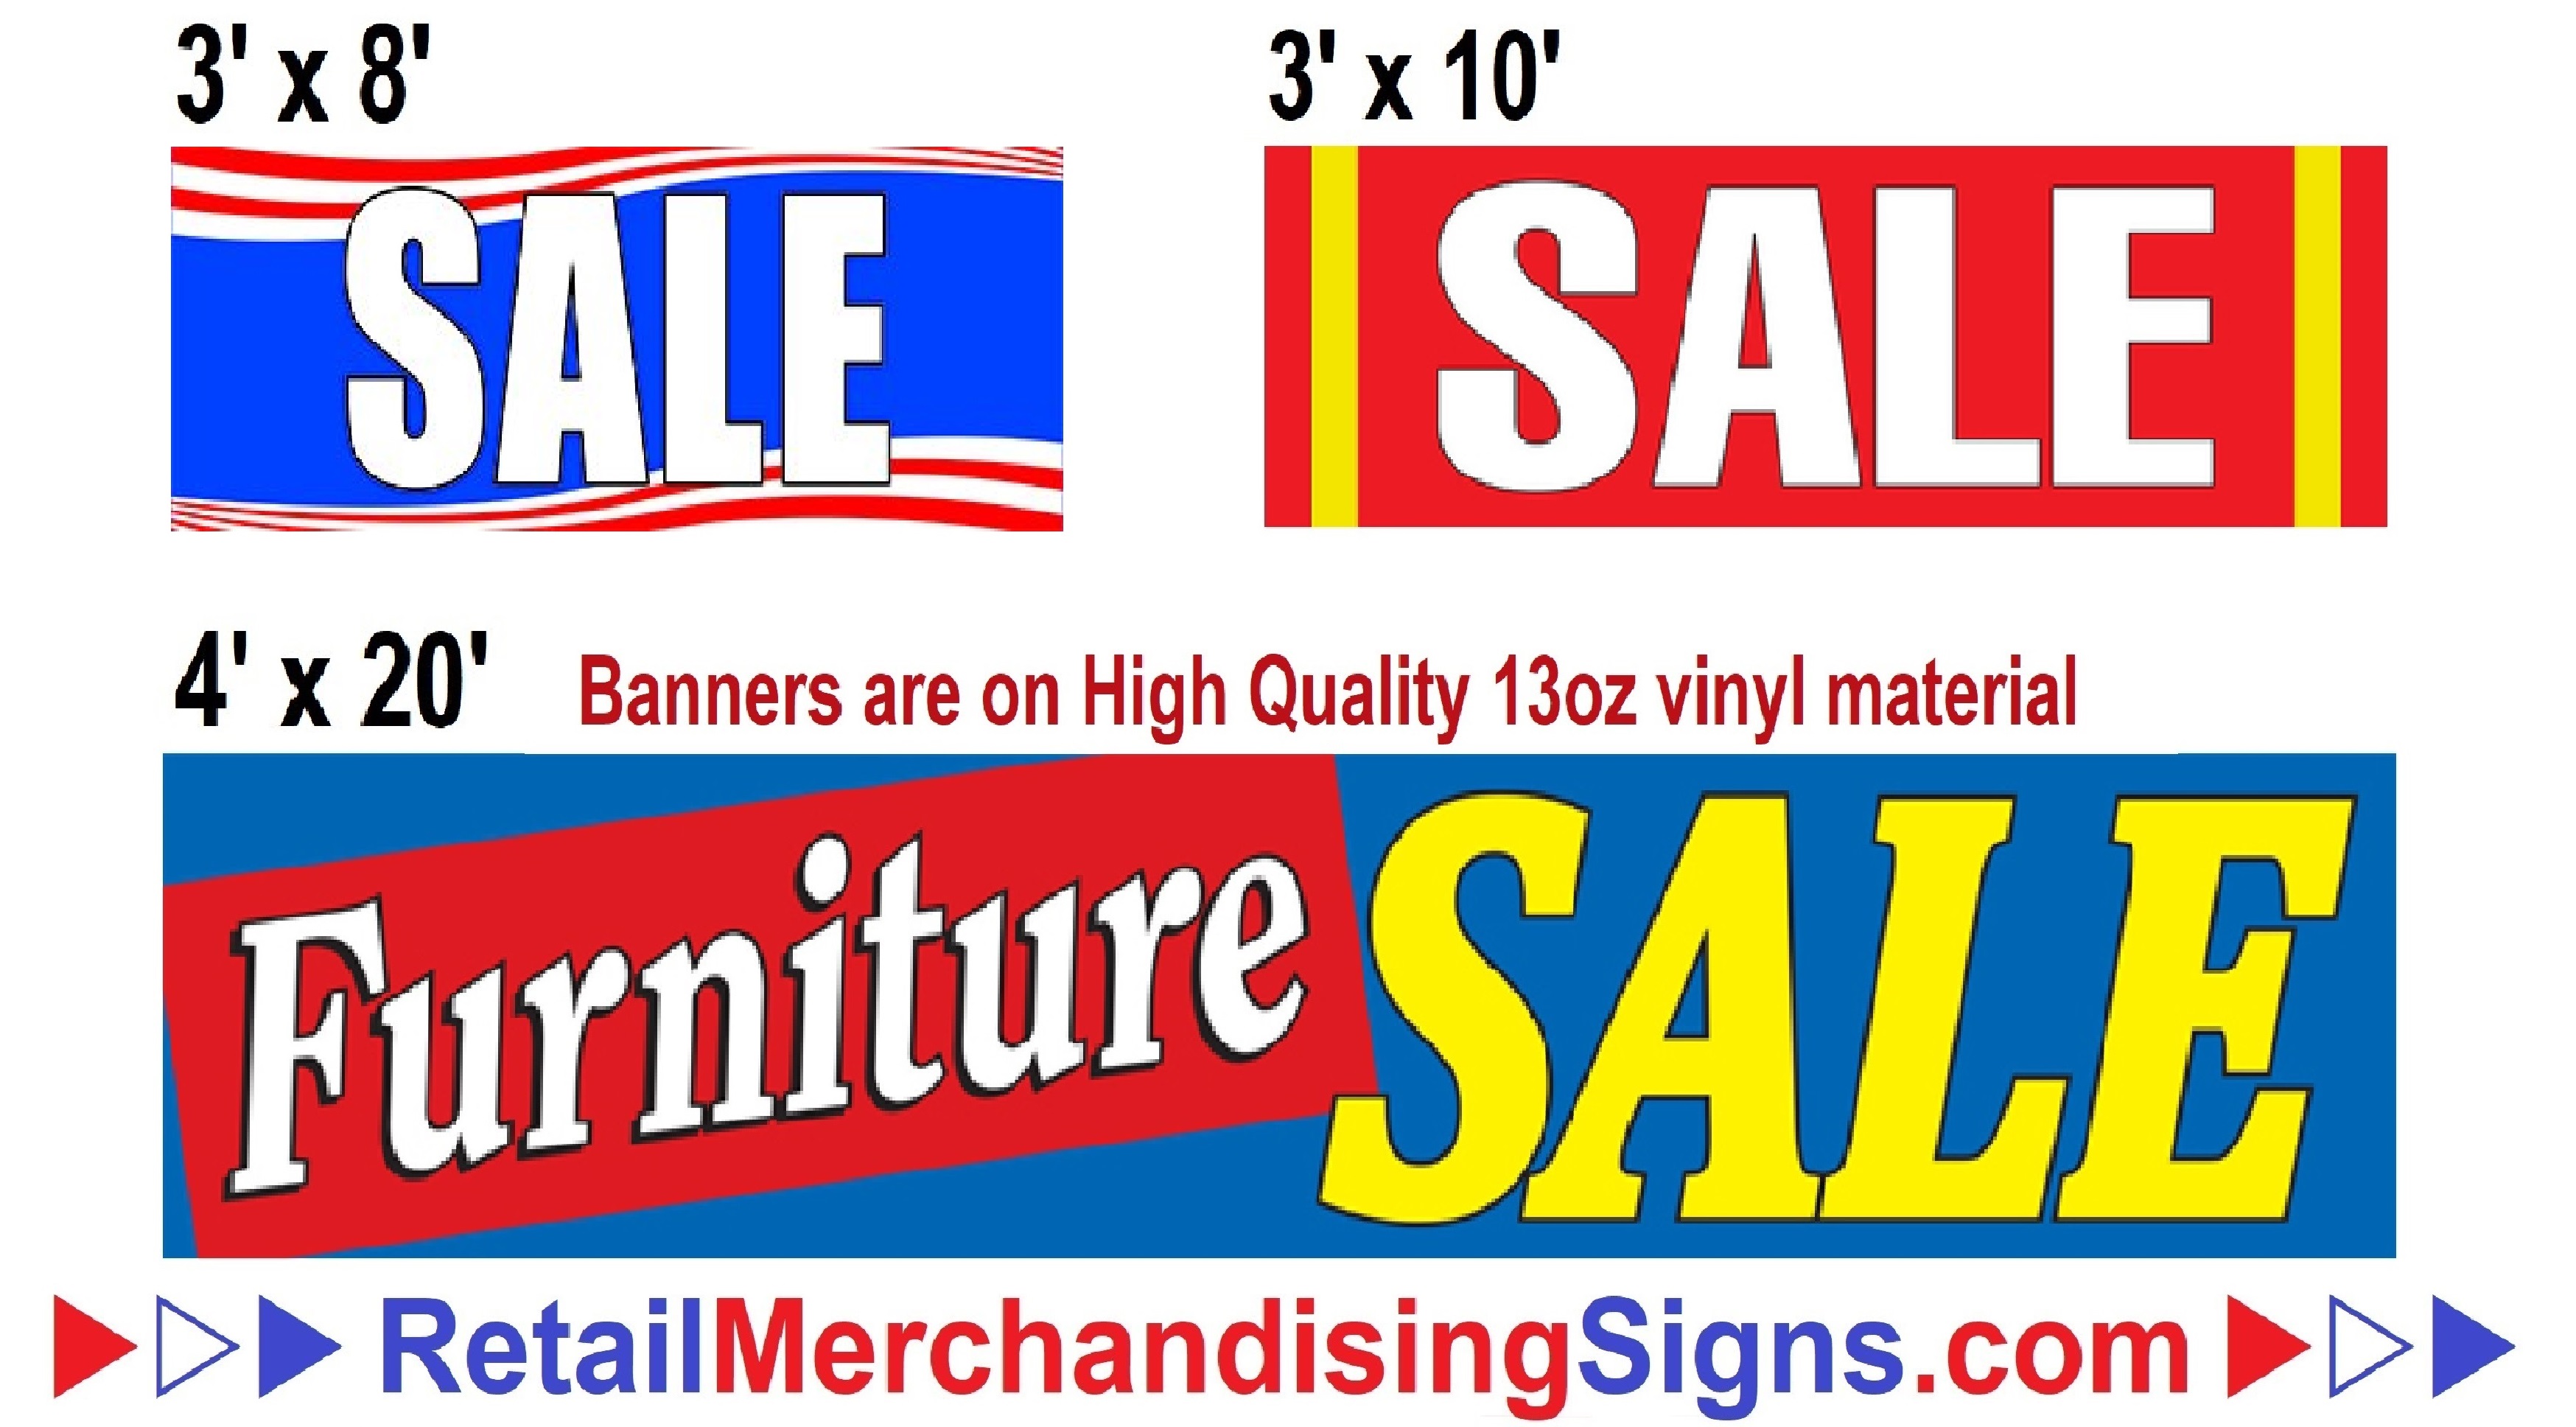 Sale Price Strung Merchandise Tags #5 Retail Store Supplies 200 Qty 